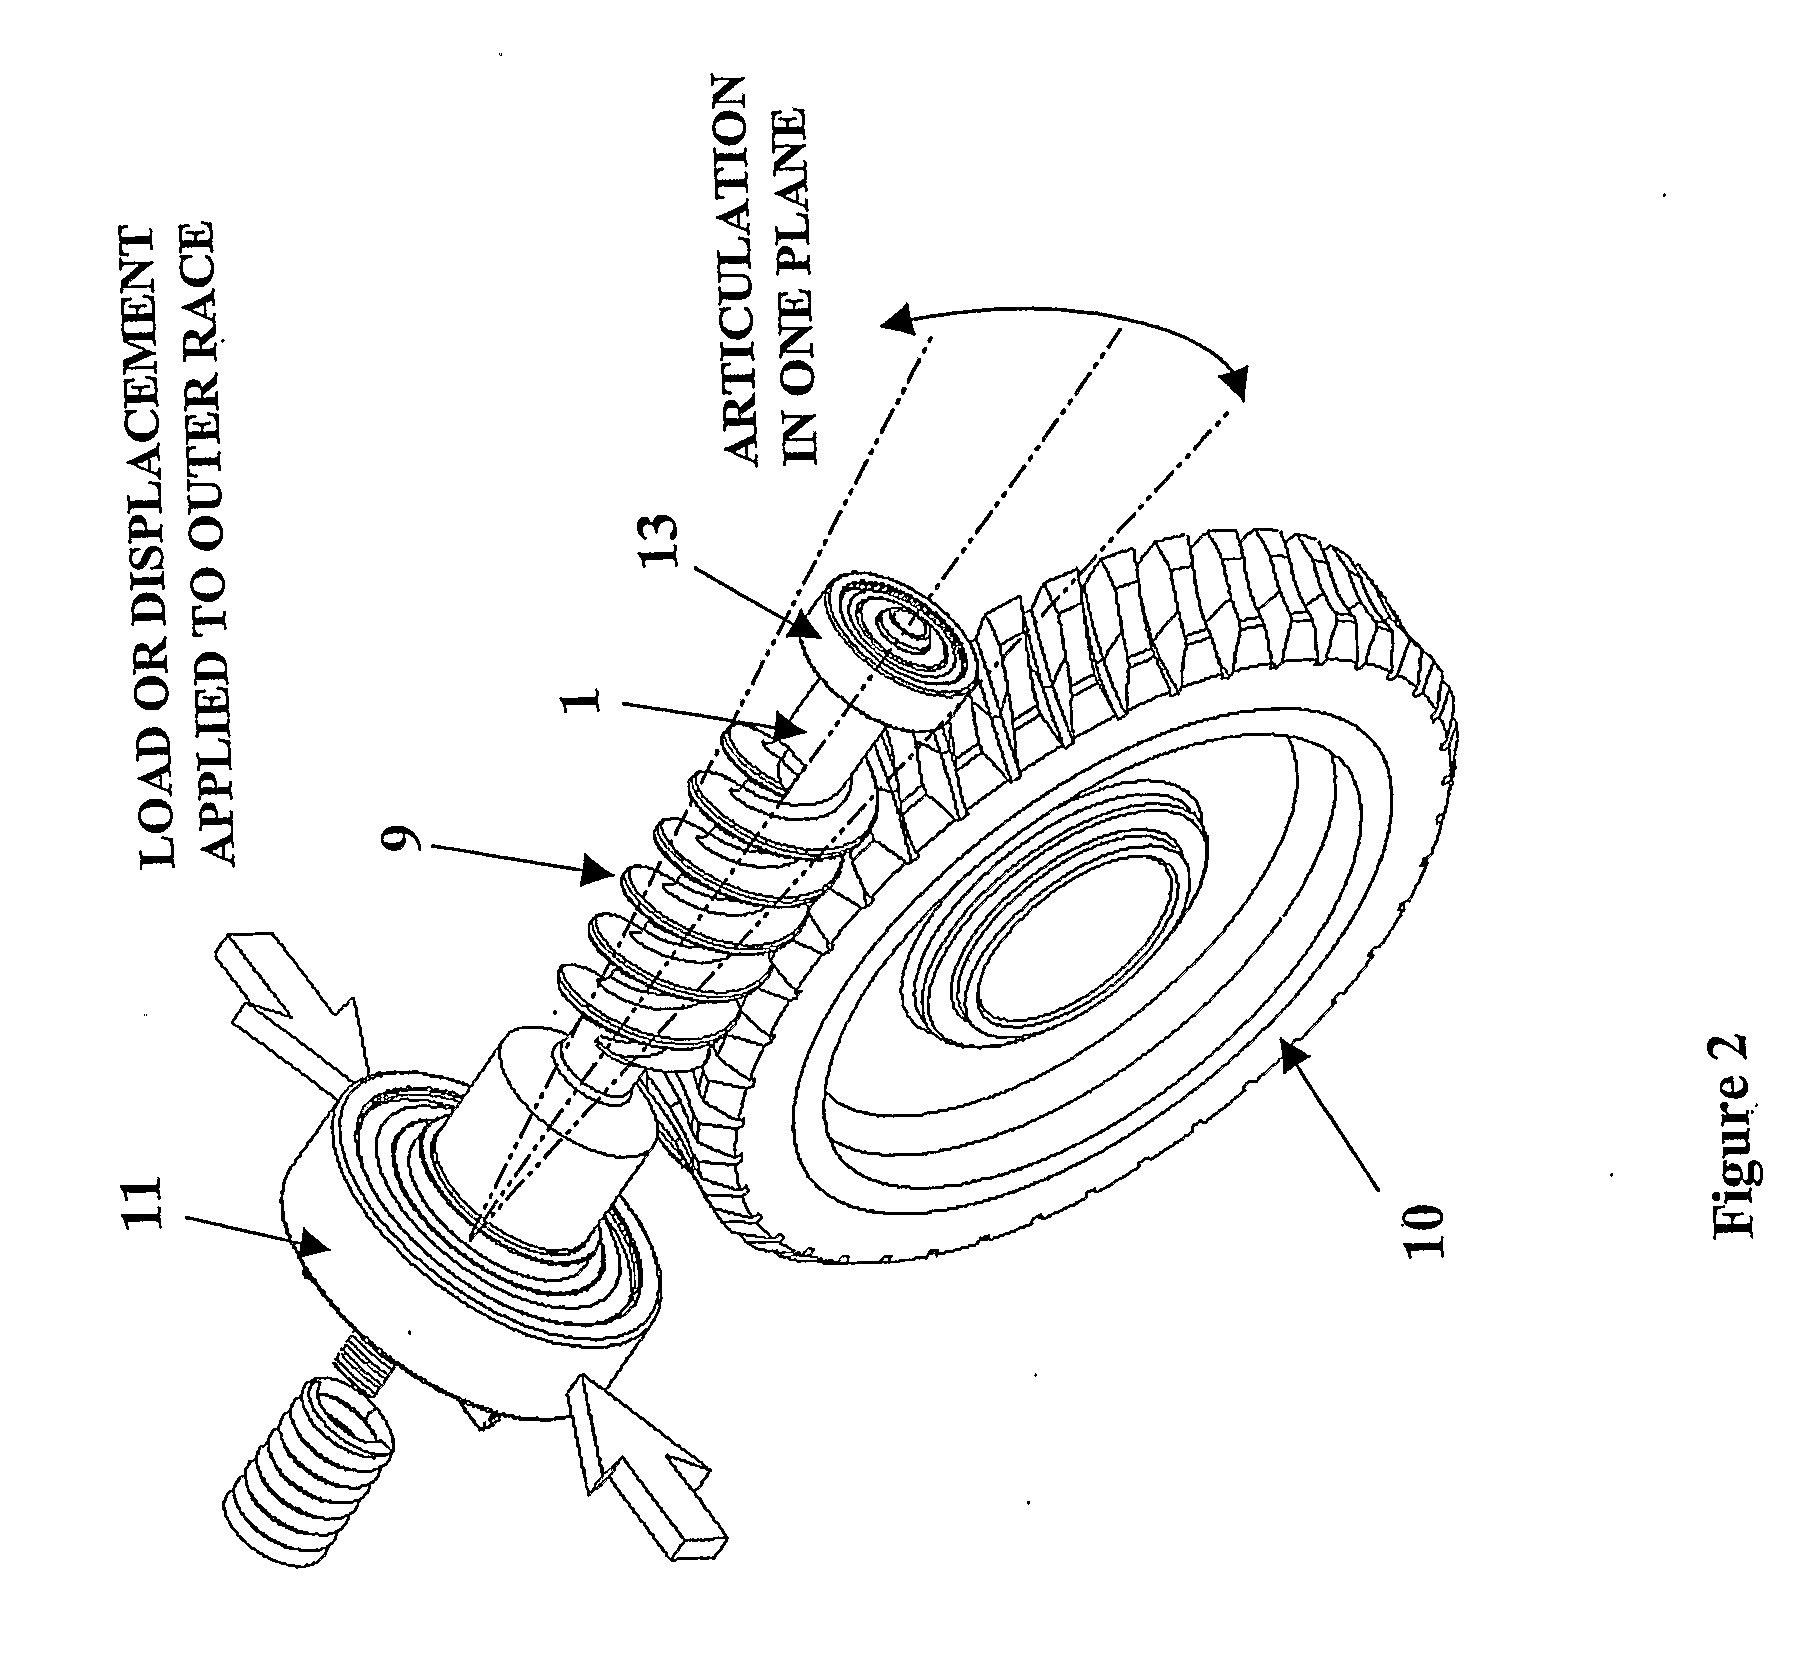 Worm gear for electric assisted steering apparatus and method controlling the movement of the worm shaft in a worm gearing